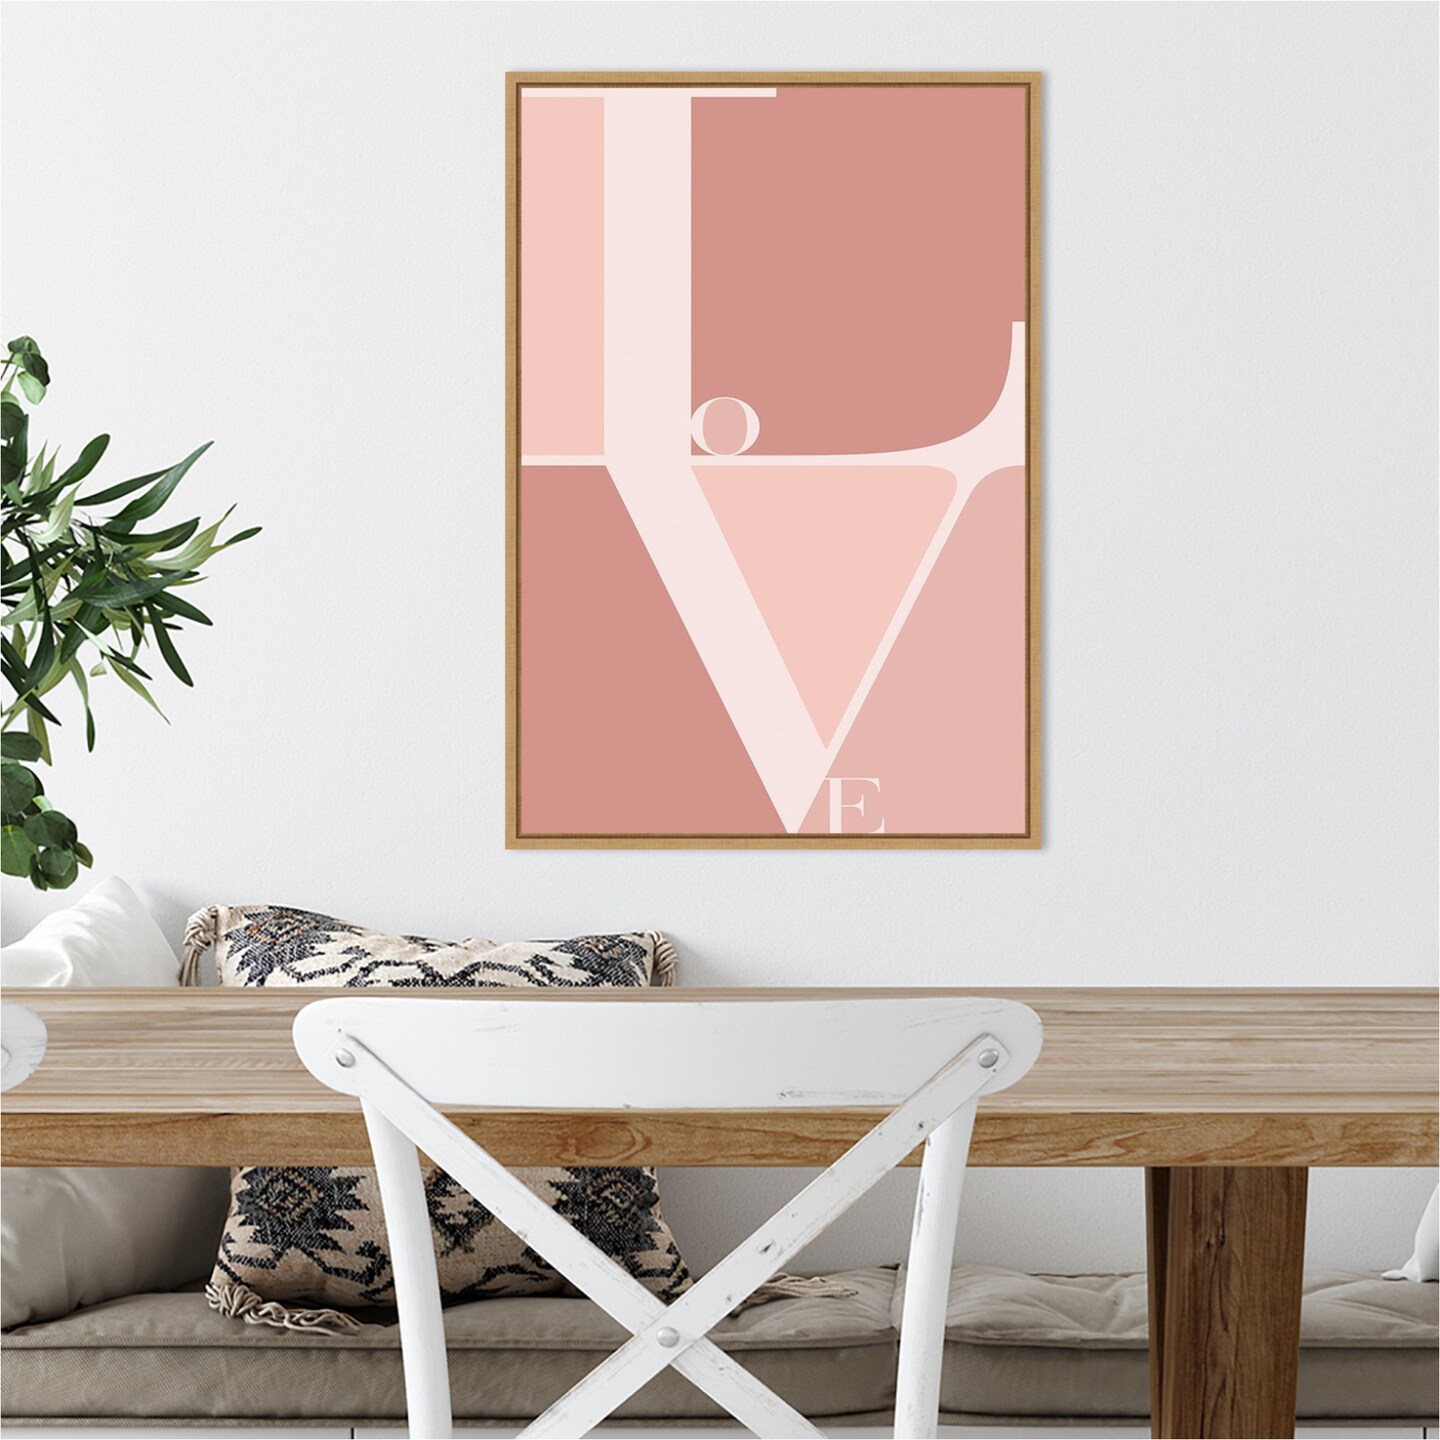 Love by Typelike 16-in. W x 23-in. H. Canvas Wall Art Print Framed in Natural